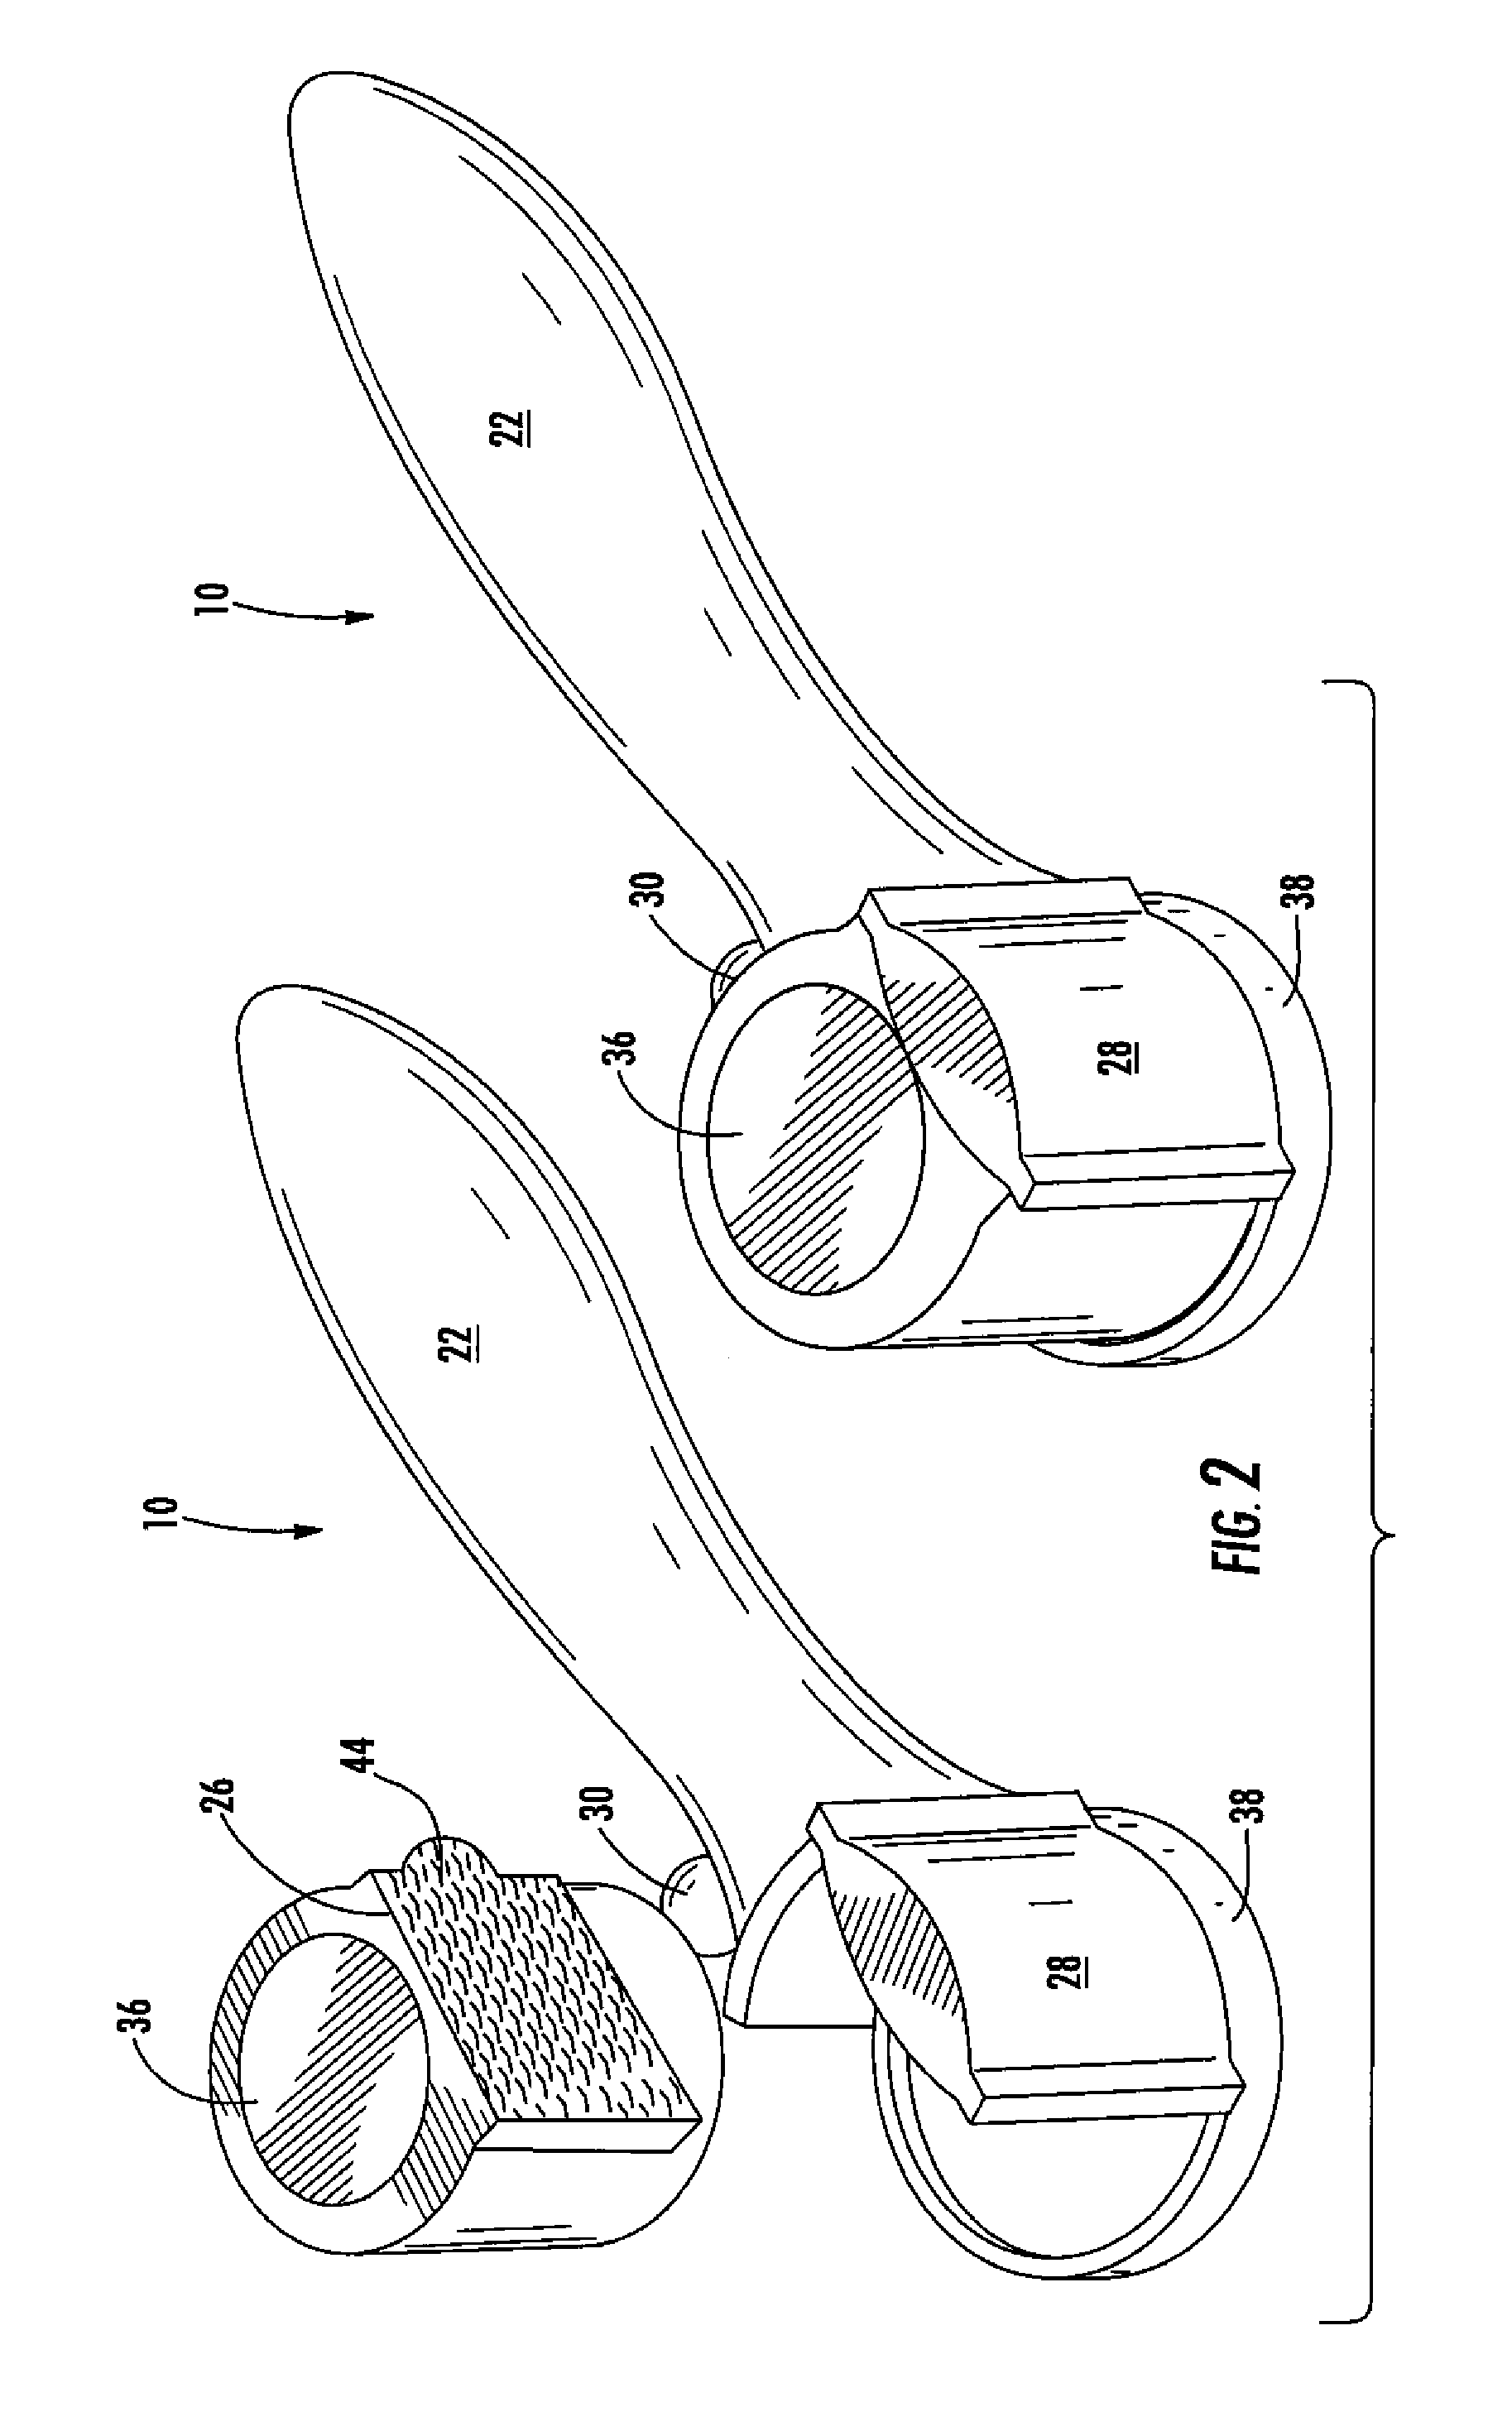 Hair Colorant Applicator and Methods